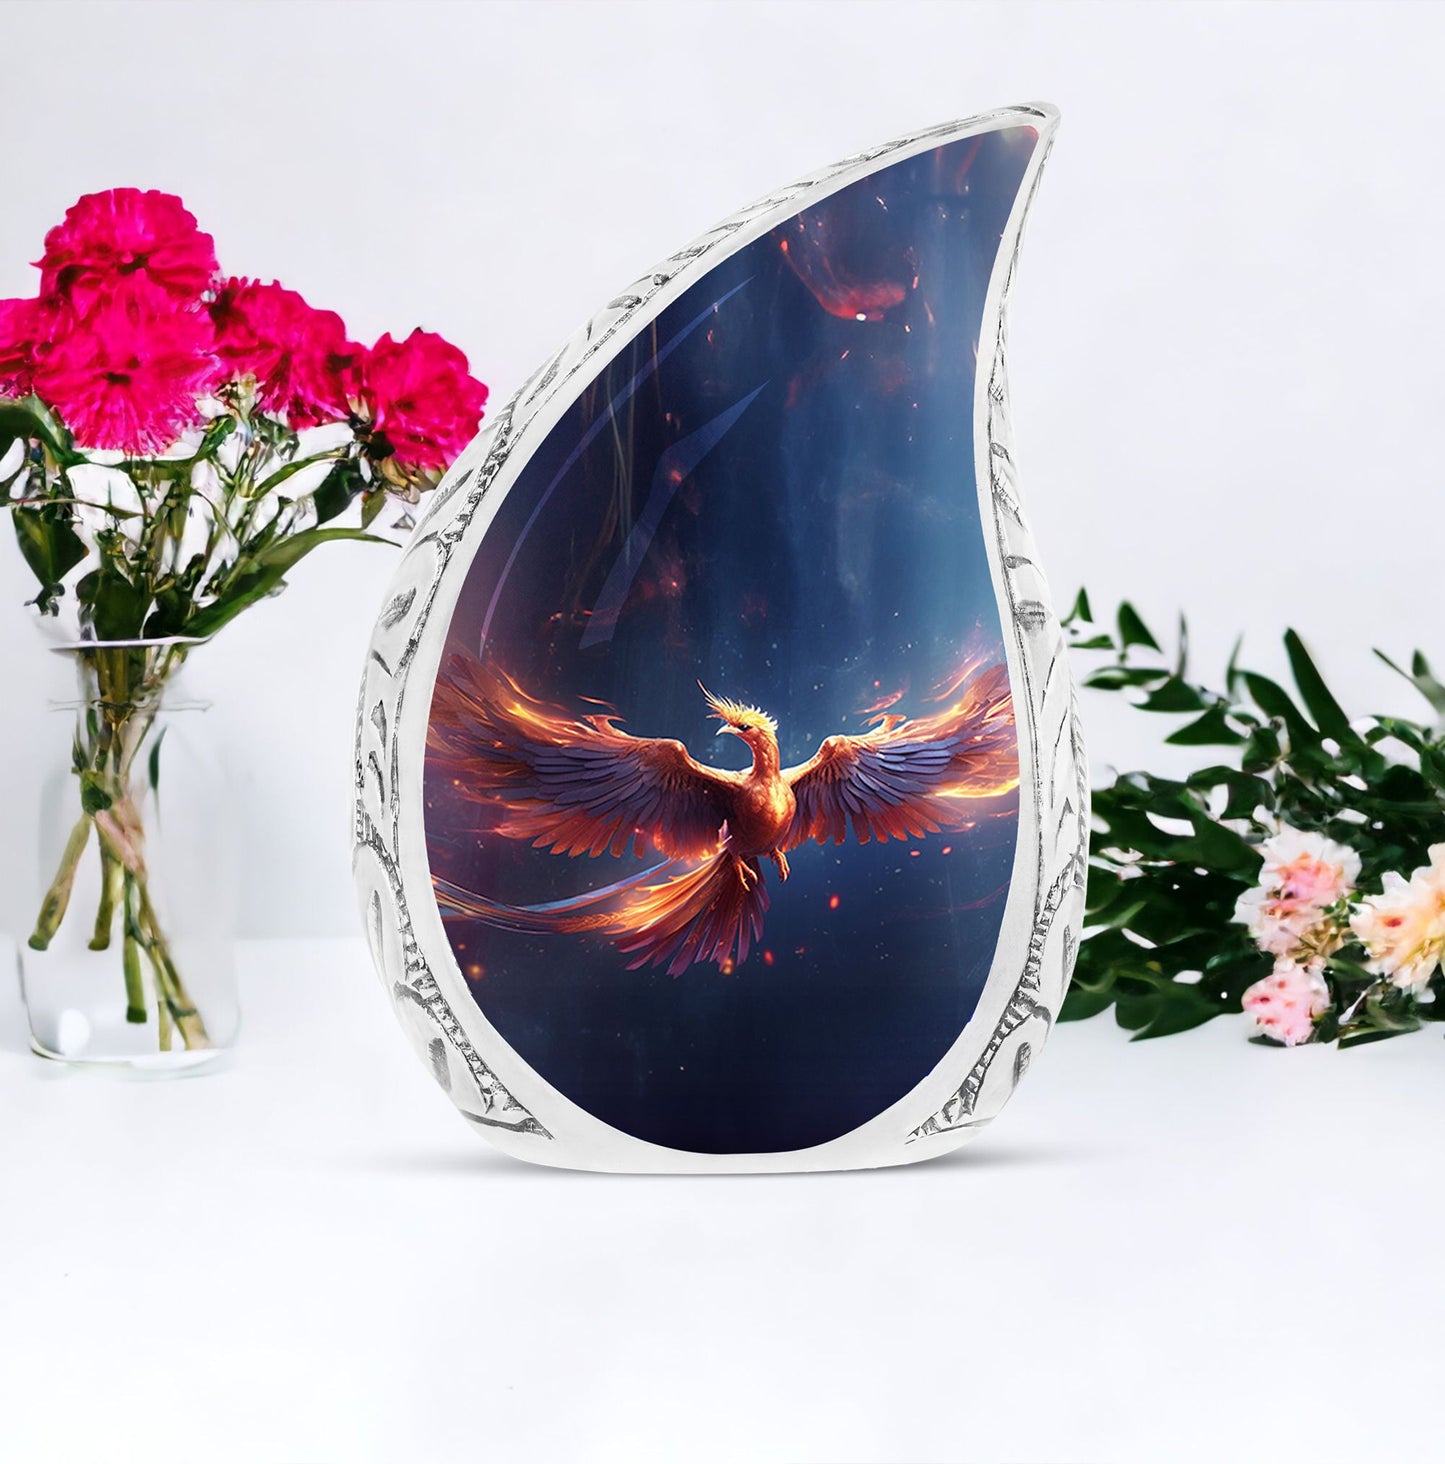 Large Phoenix Urns designed for burial, depicted in vibrant red and blue fire, ideal for storing adult human ashes in an artistic and decorative manner.